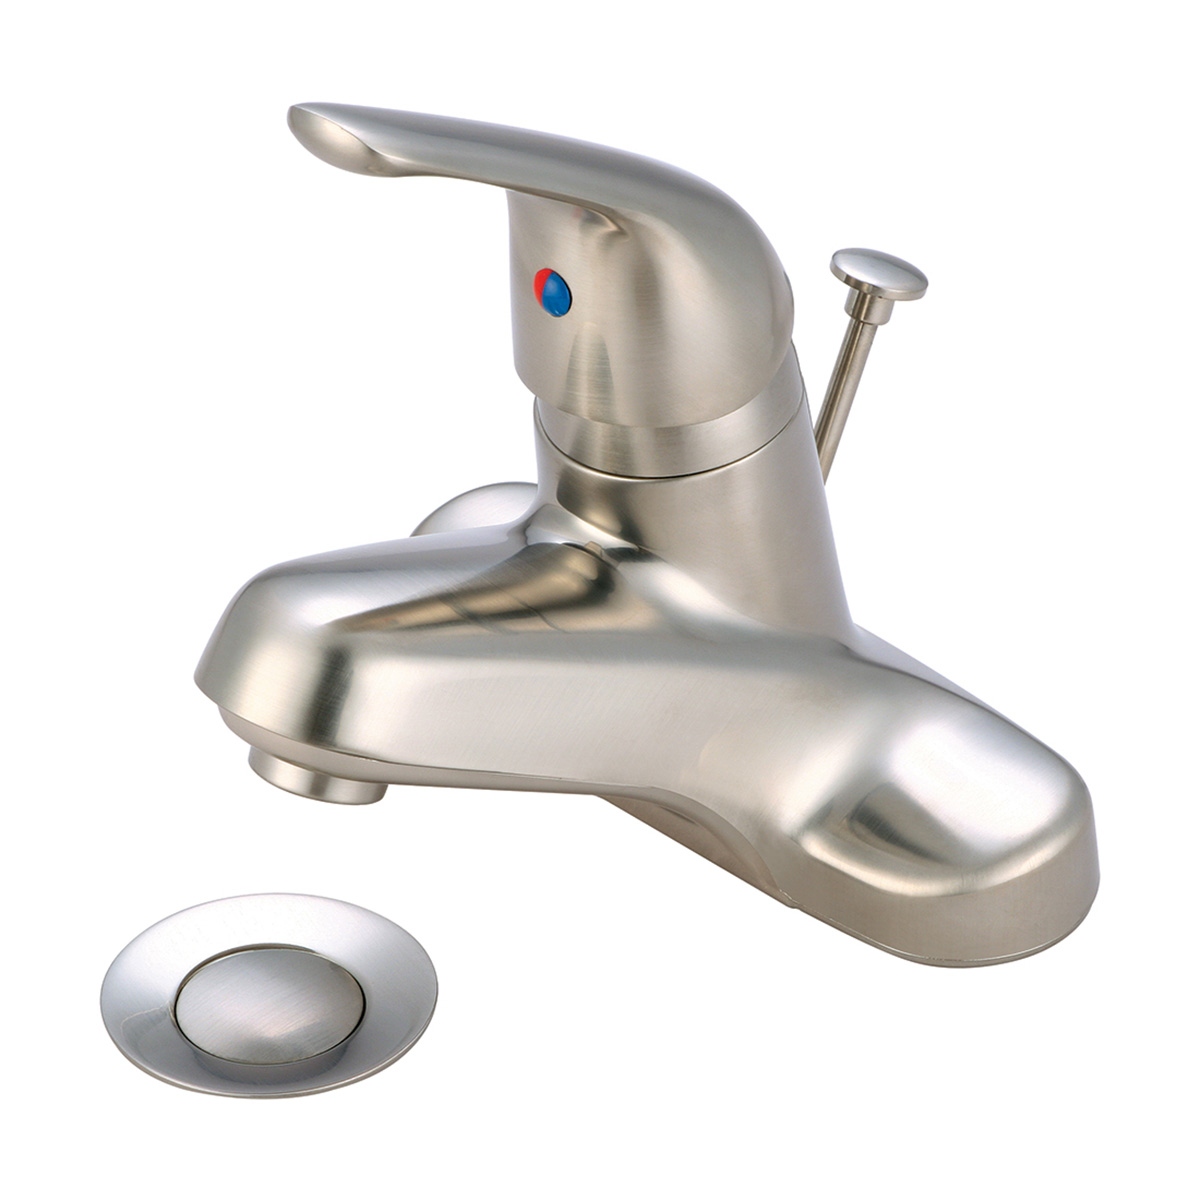 L-6160h-bn Single Handle Lavatory Faucet - Brushed Nickel